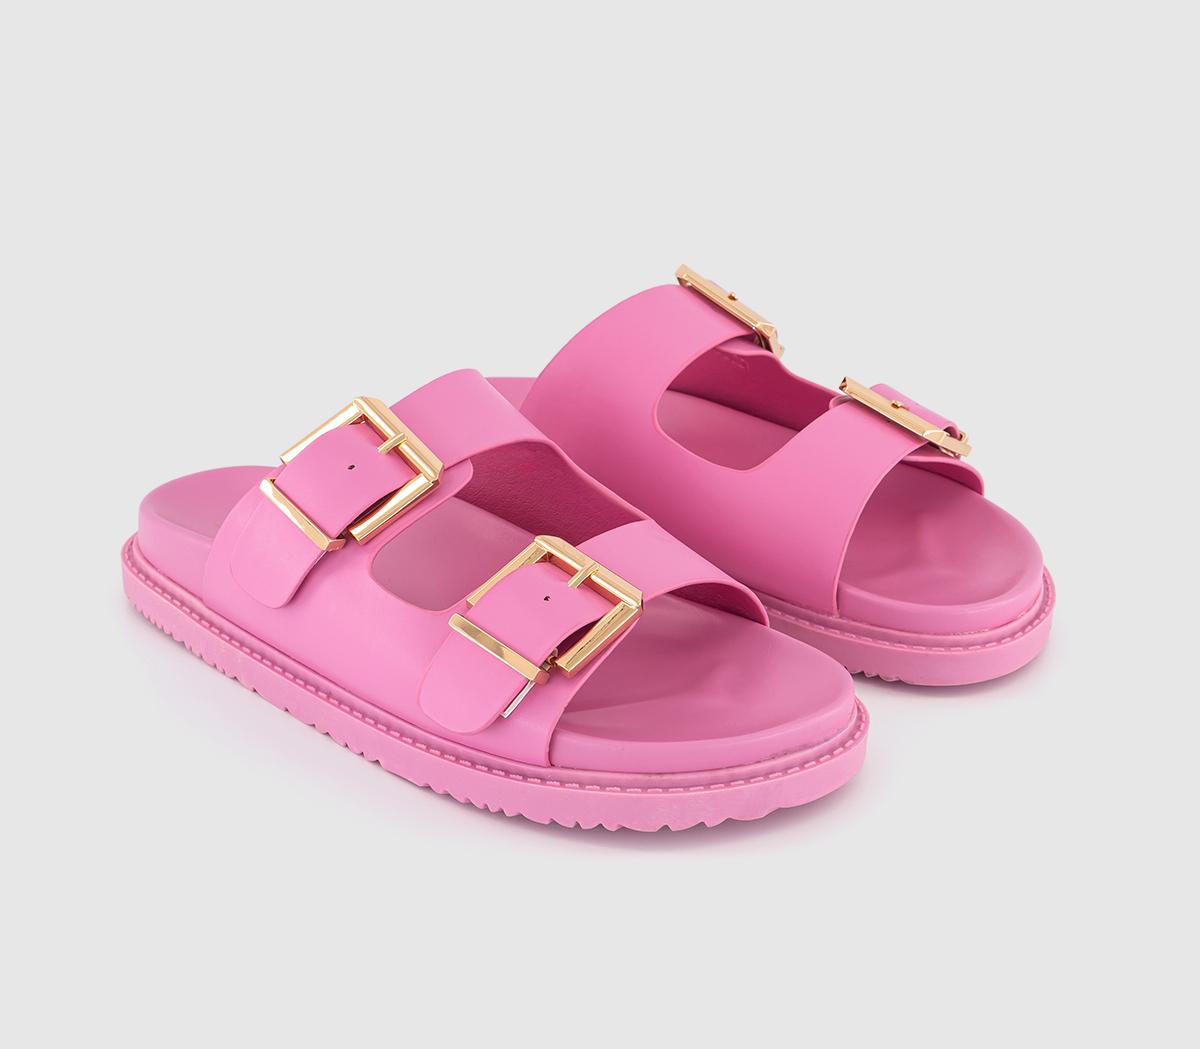 OFFICE Sunkissed Double Strap Chunky Sliders Hot Pink - Women’s Sandals